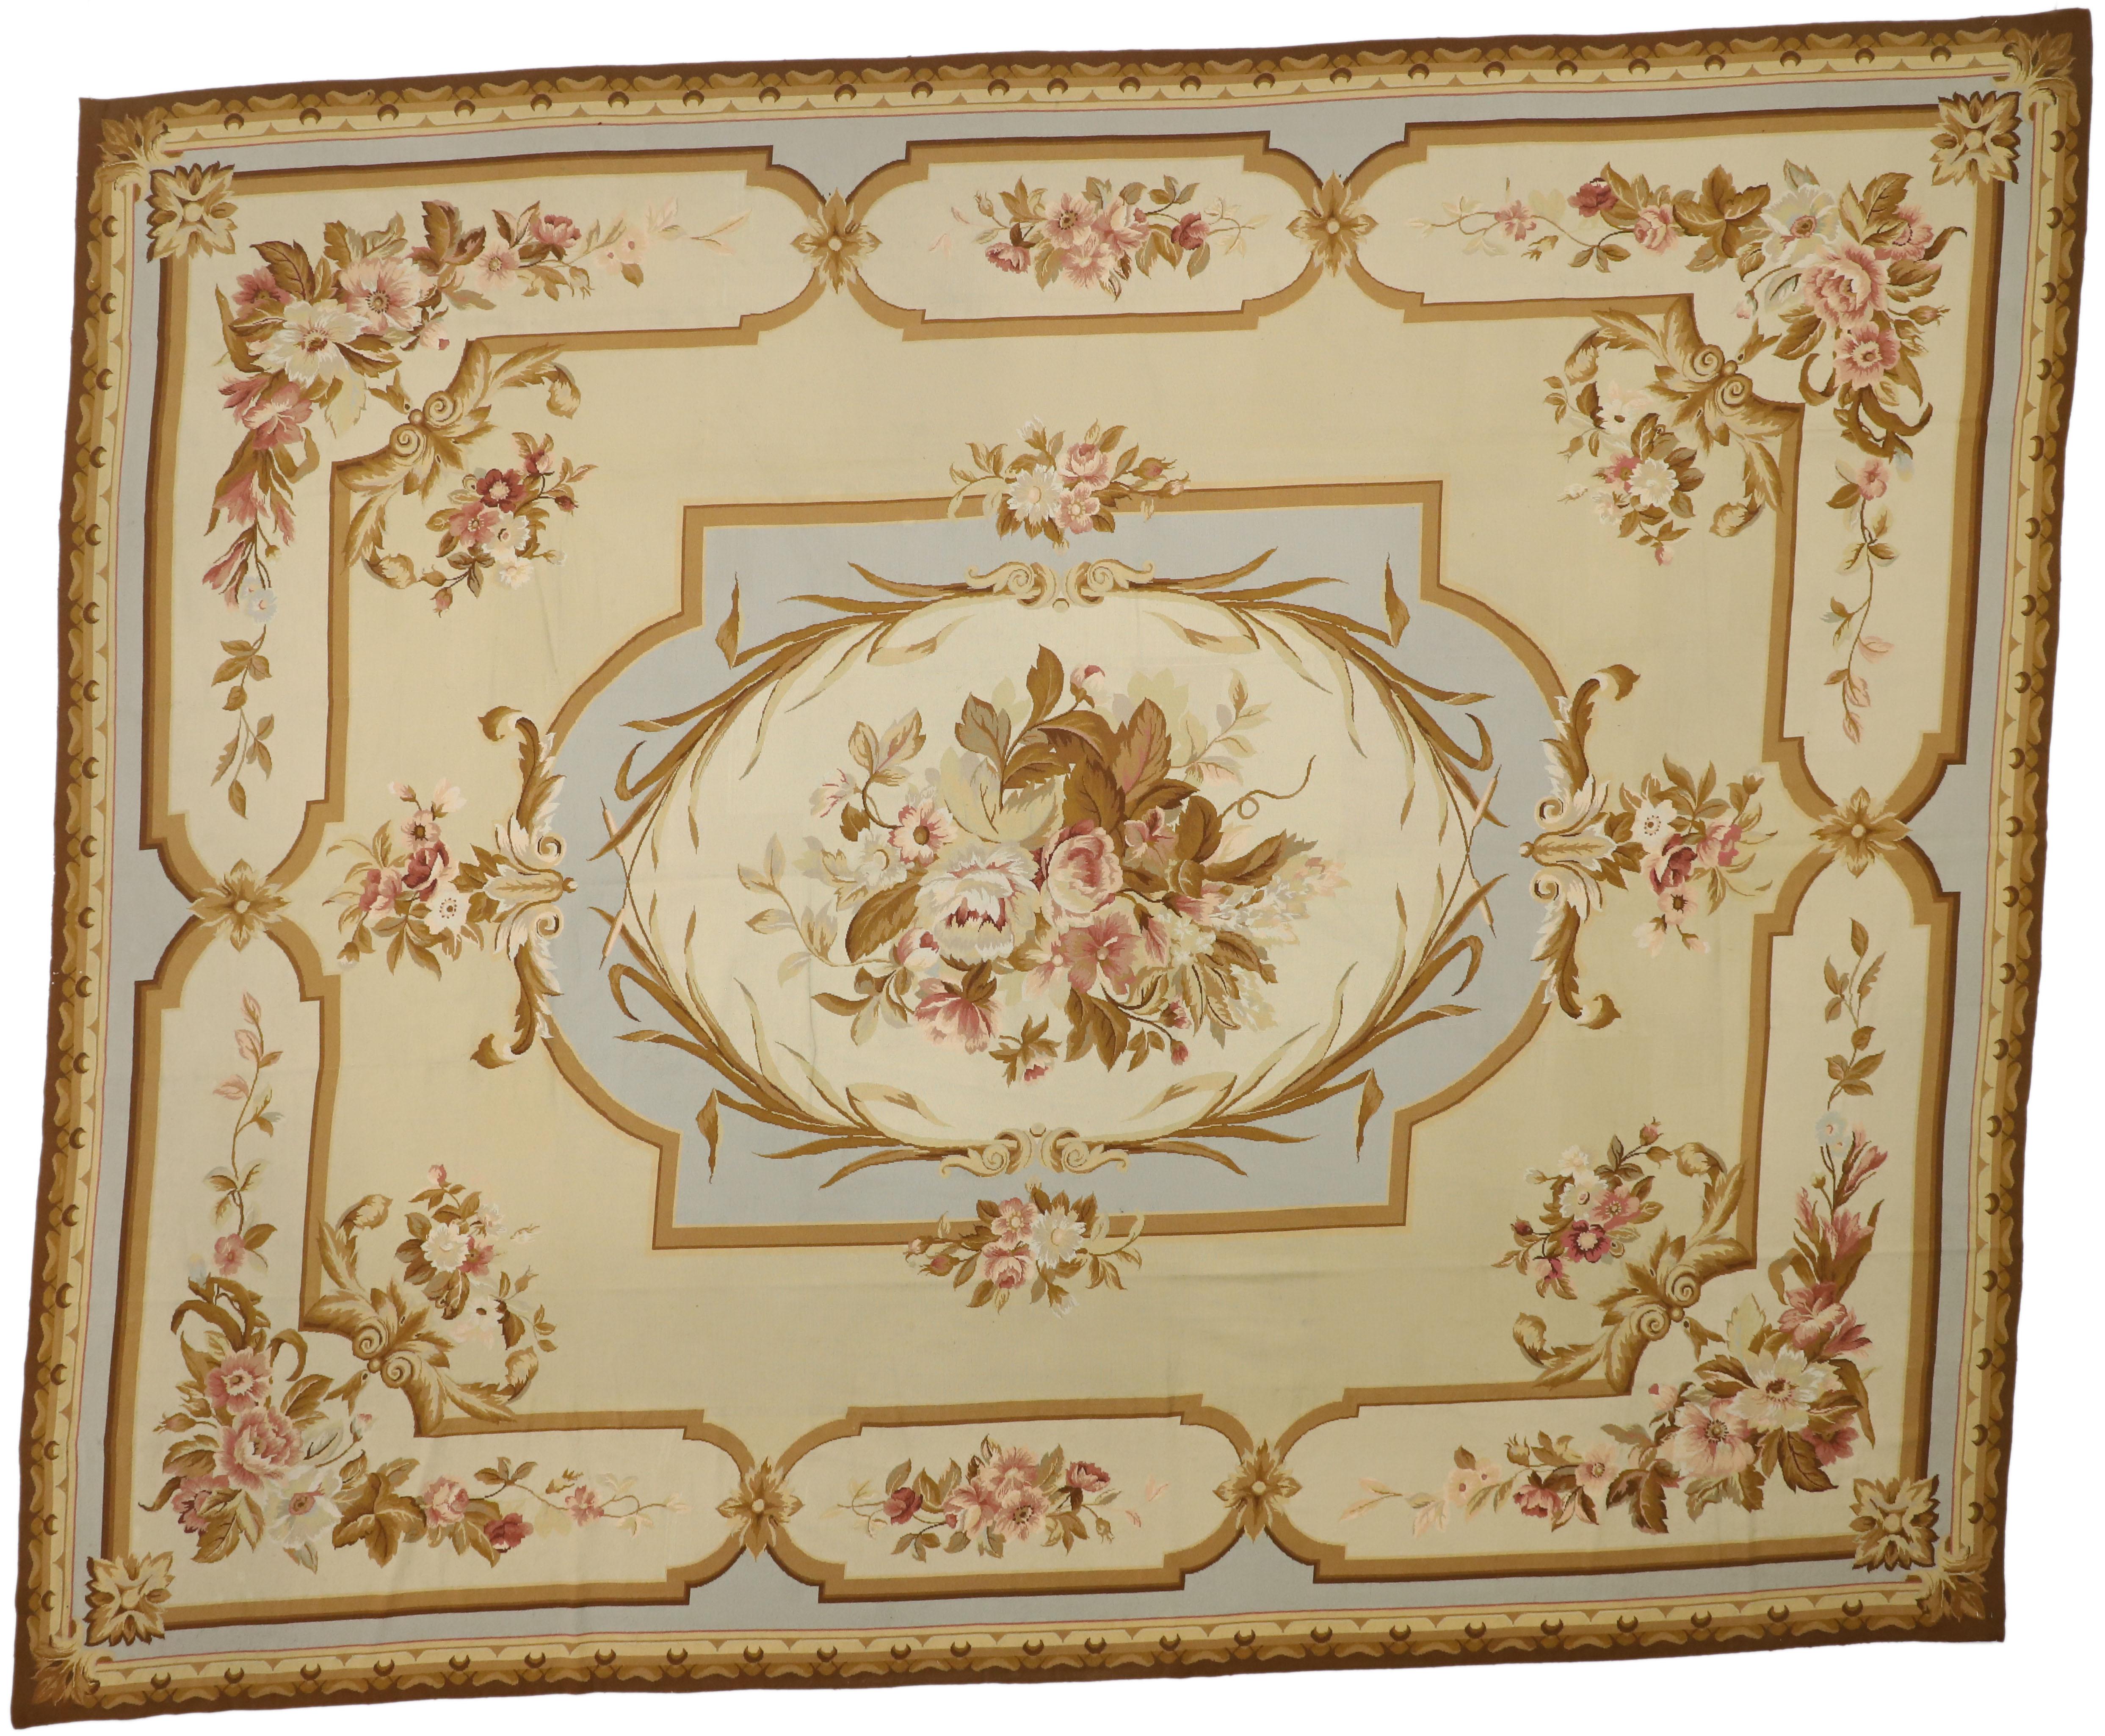 76741 Vintage Chinese Needlepoint Rug with Aubusson Design and French Provincial Style. Regal, refined and opulent, French Provincial style is always trending. Whether cozy casual of French country or the lavish Rococo, this vintage Chinese